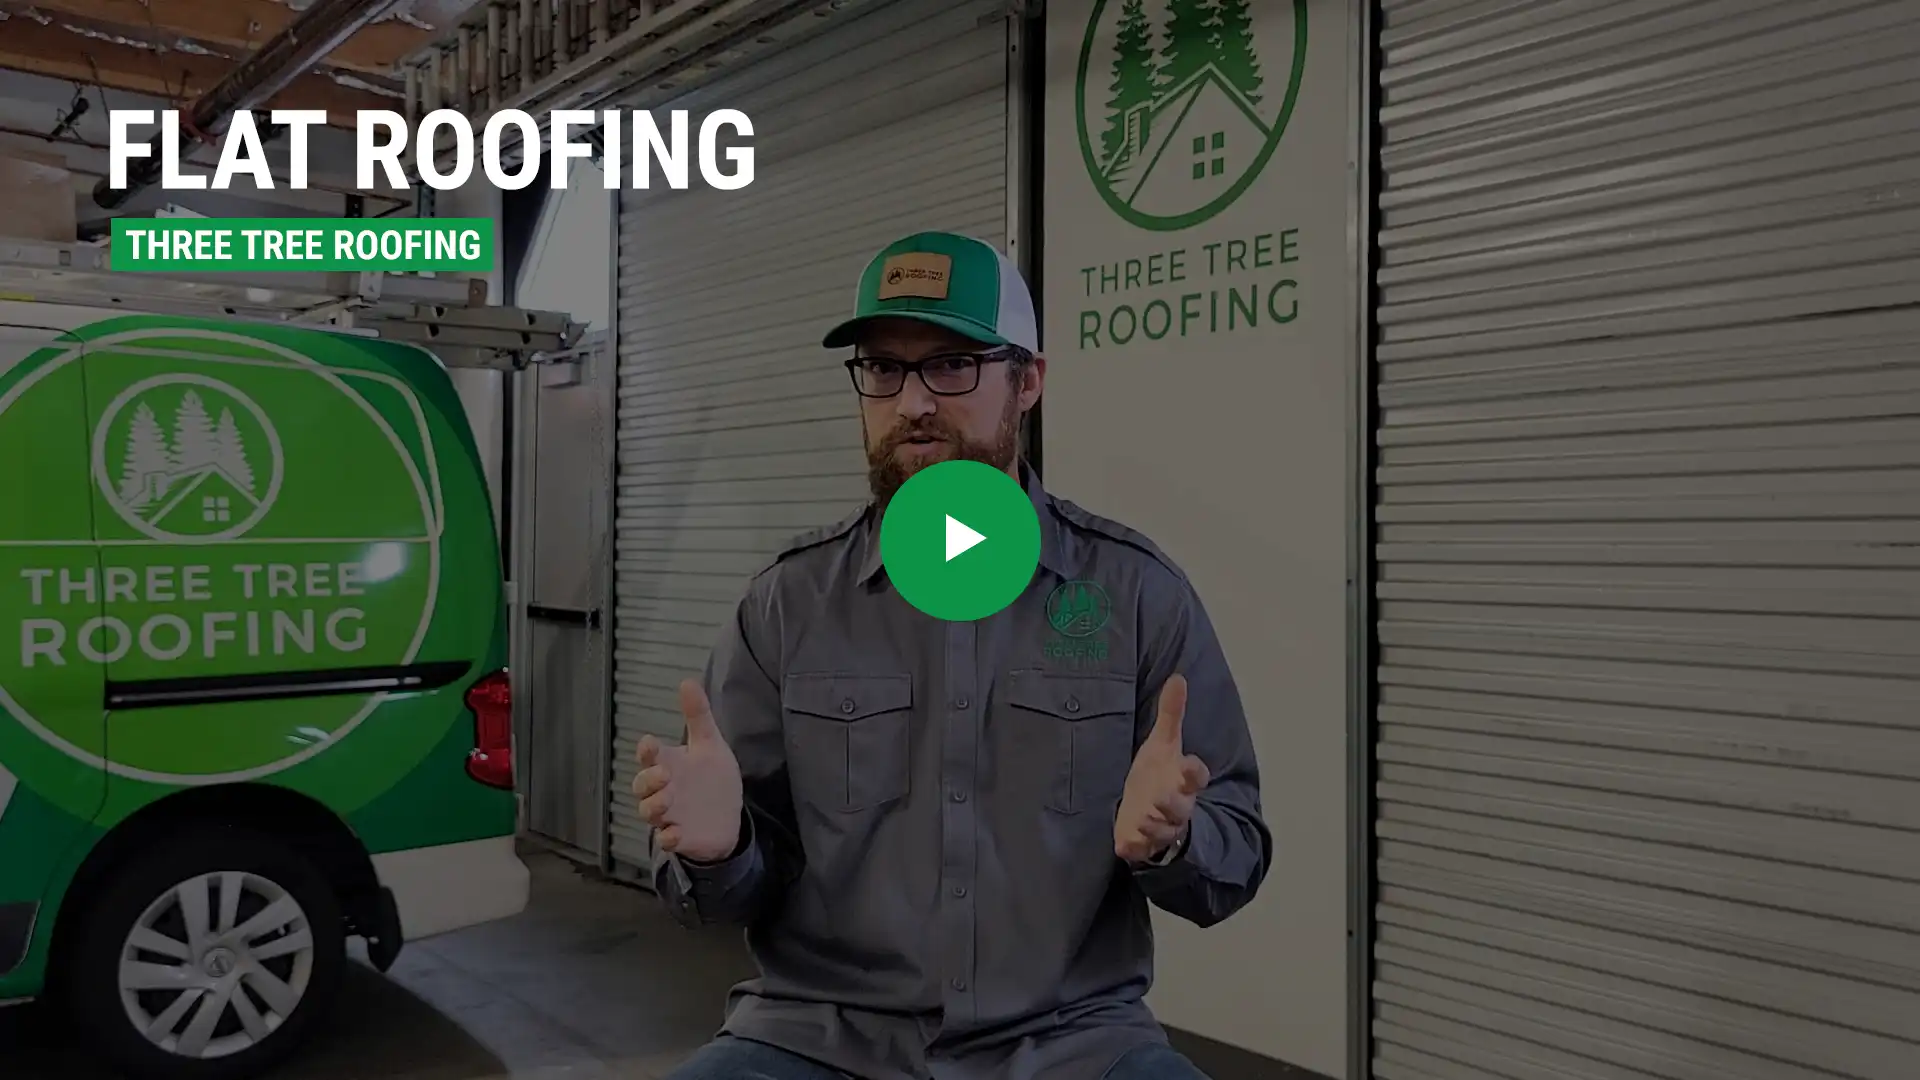 Flat Roofing - Roofing Video